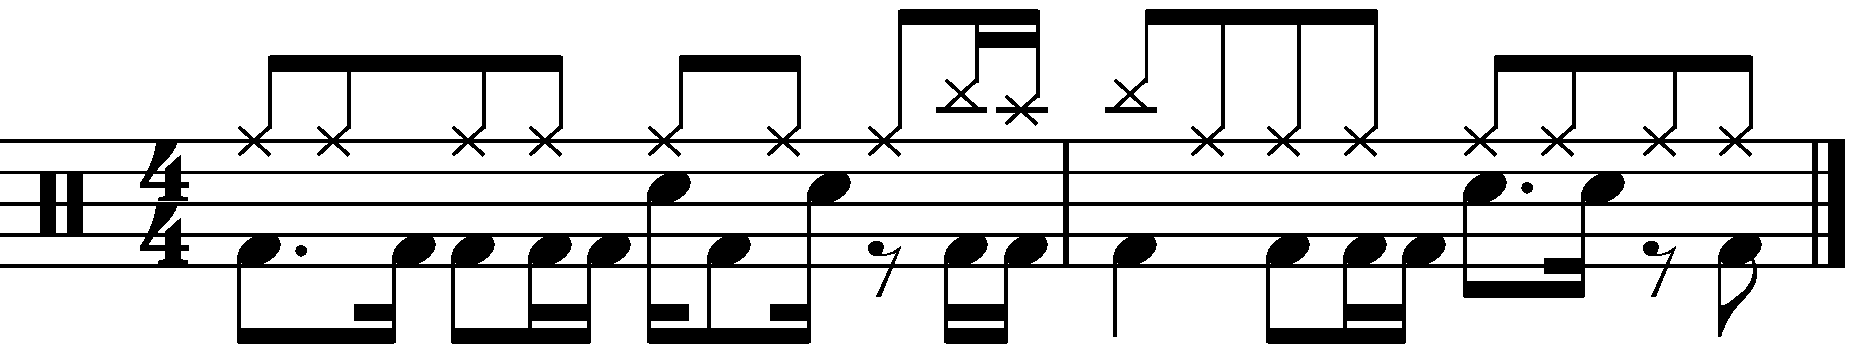 The concept applied to a half time groove with eighth note right hands